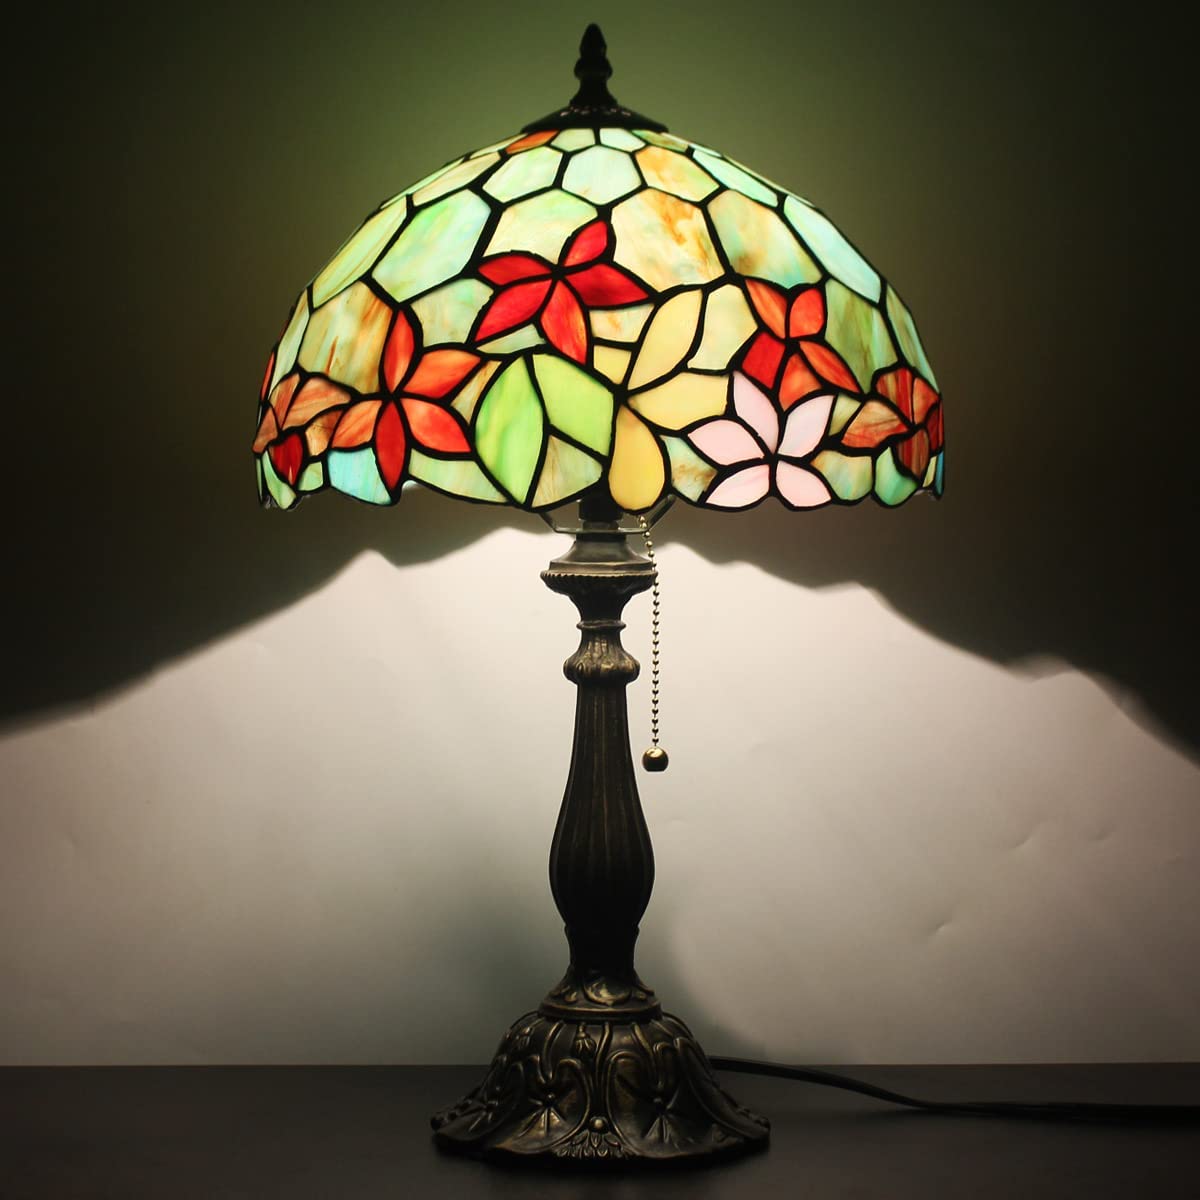 Werfactory® Tiffany Style Lamp W12H19 Inch Stained Glass Flower Table Lamp